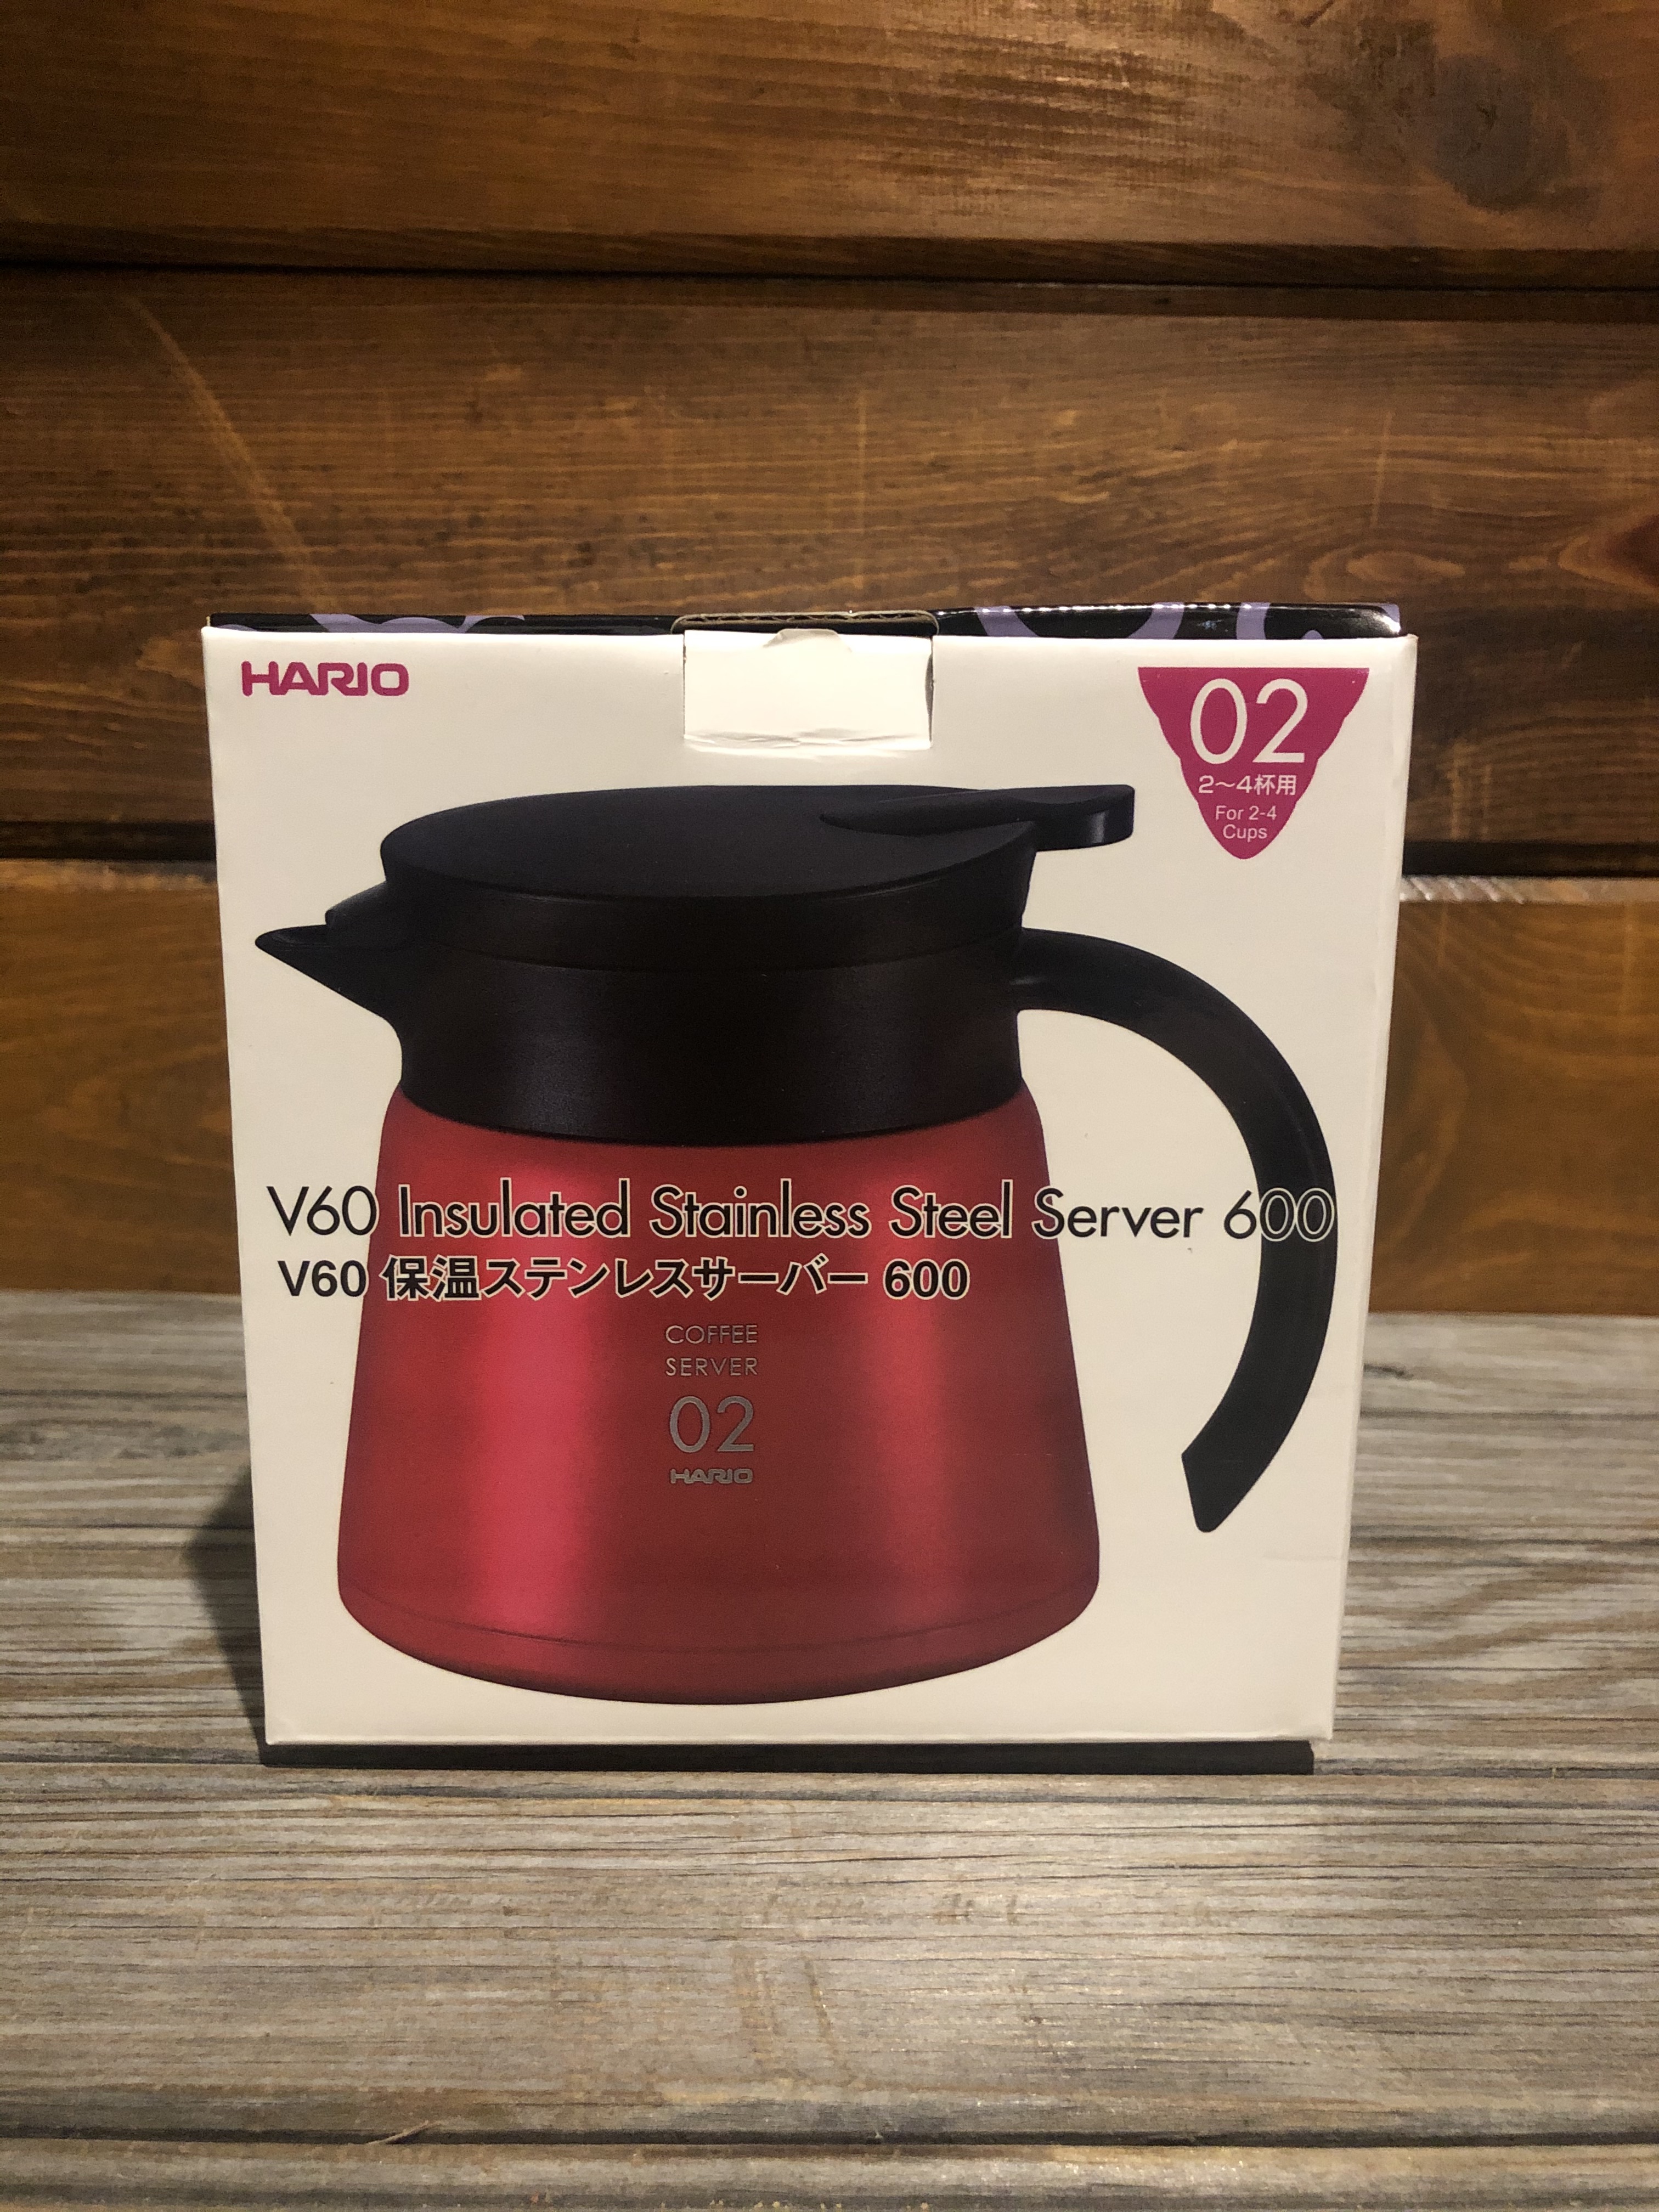 Picture Hario V60 Insulated Stainless Steel Server 